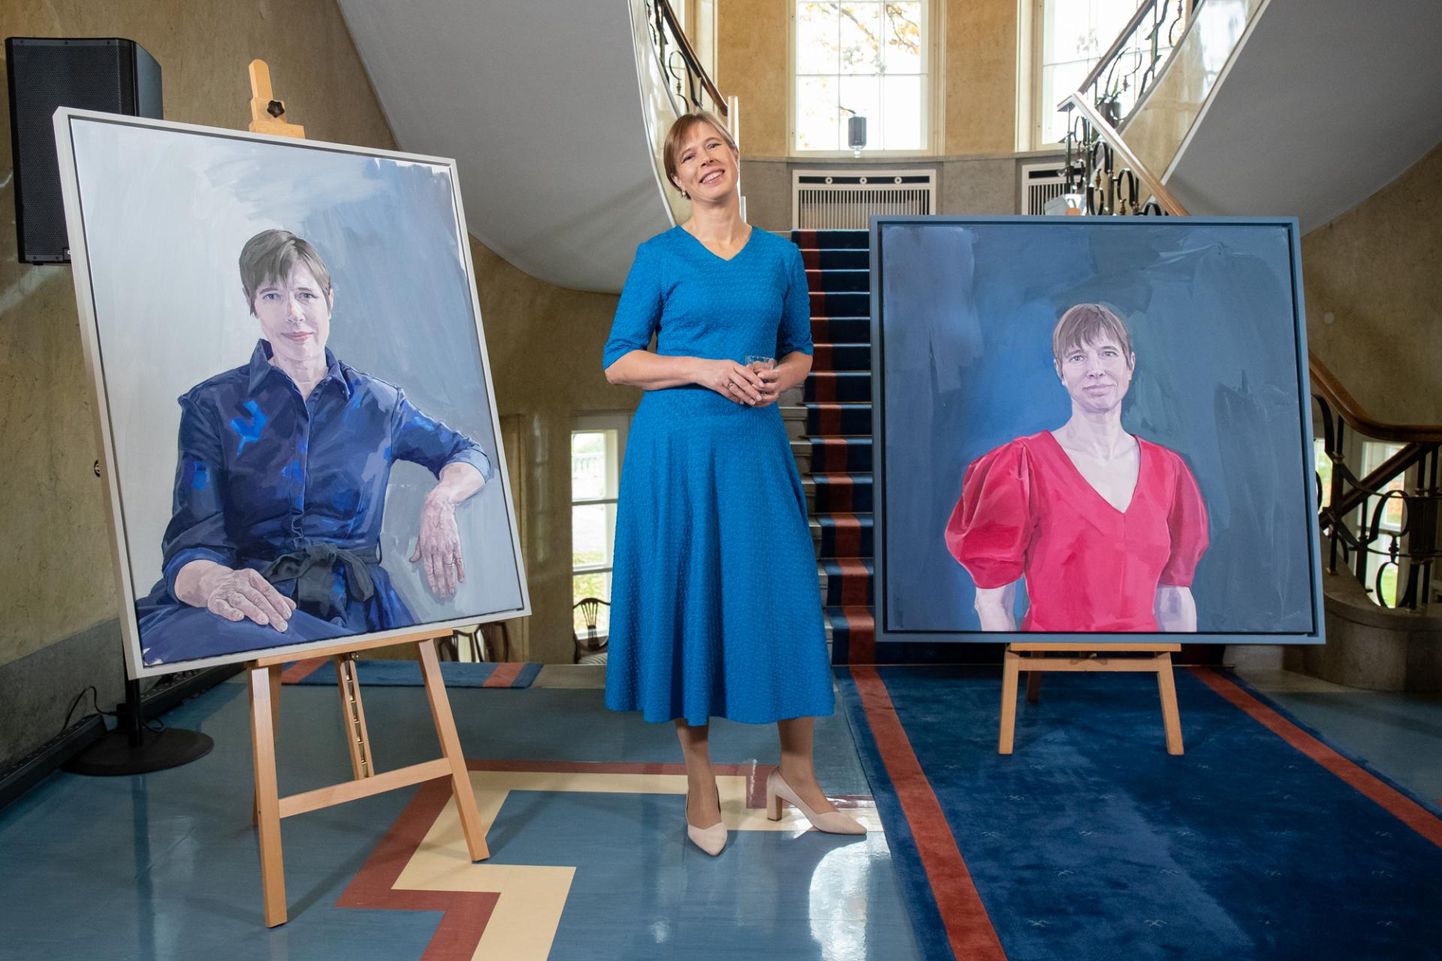 Two paintings of the outgoing President Kersti Kaljulaid by Alice Kase. The painting of Kaljulaid in the red dress will adorn the Riigikogu and the one of her in the blue dress her home.